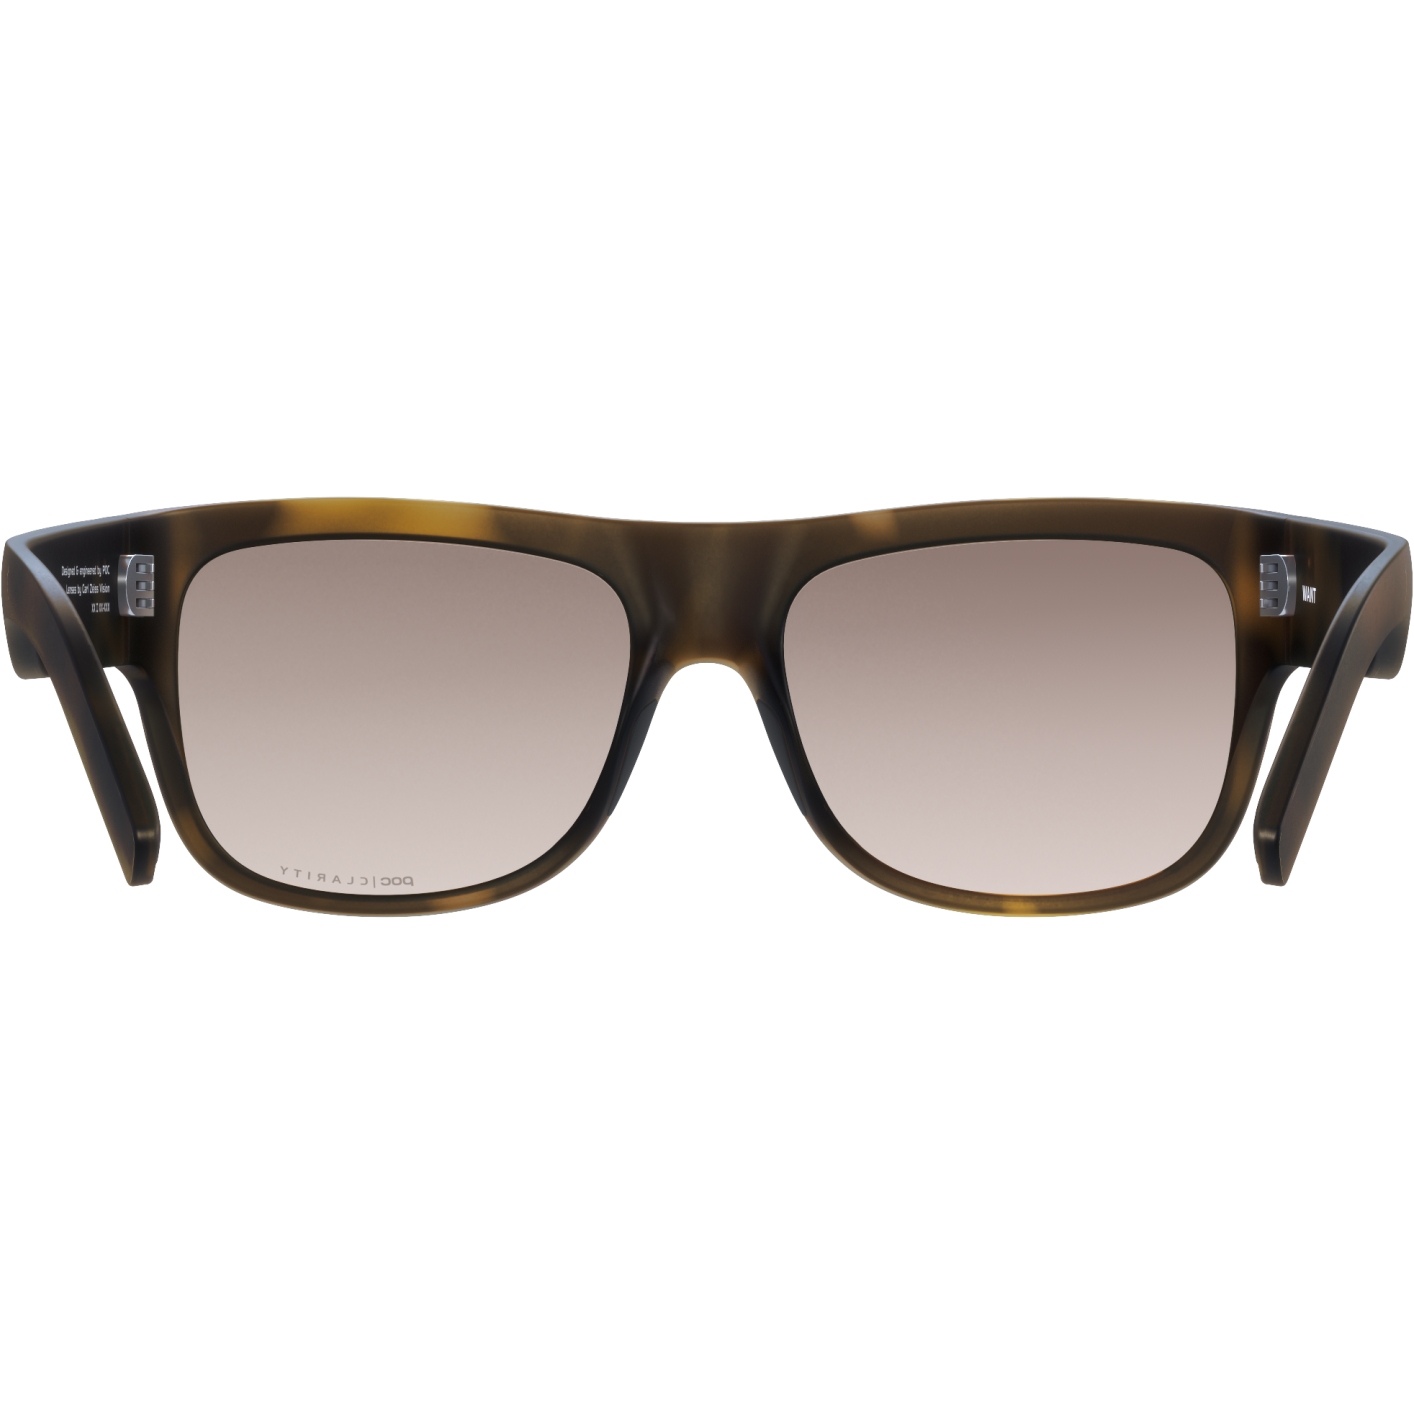 POC Want Glasses - Tortoise Brown / Clarity Trail/Partly Sunny